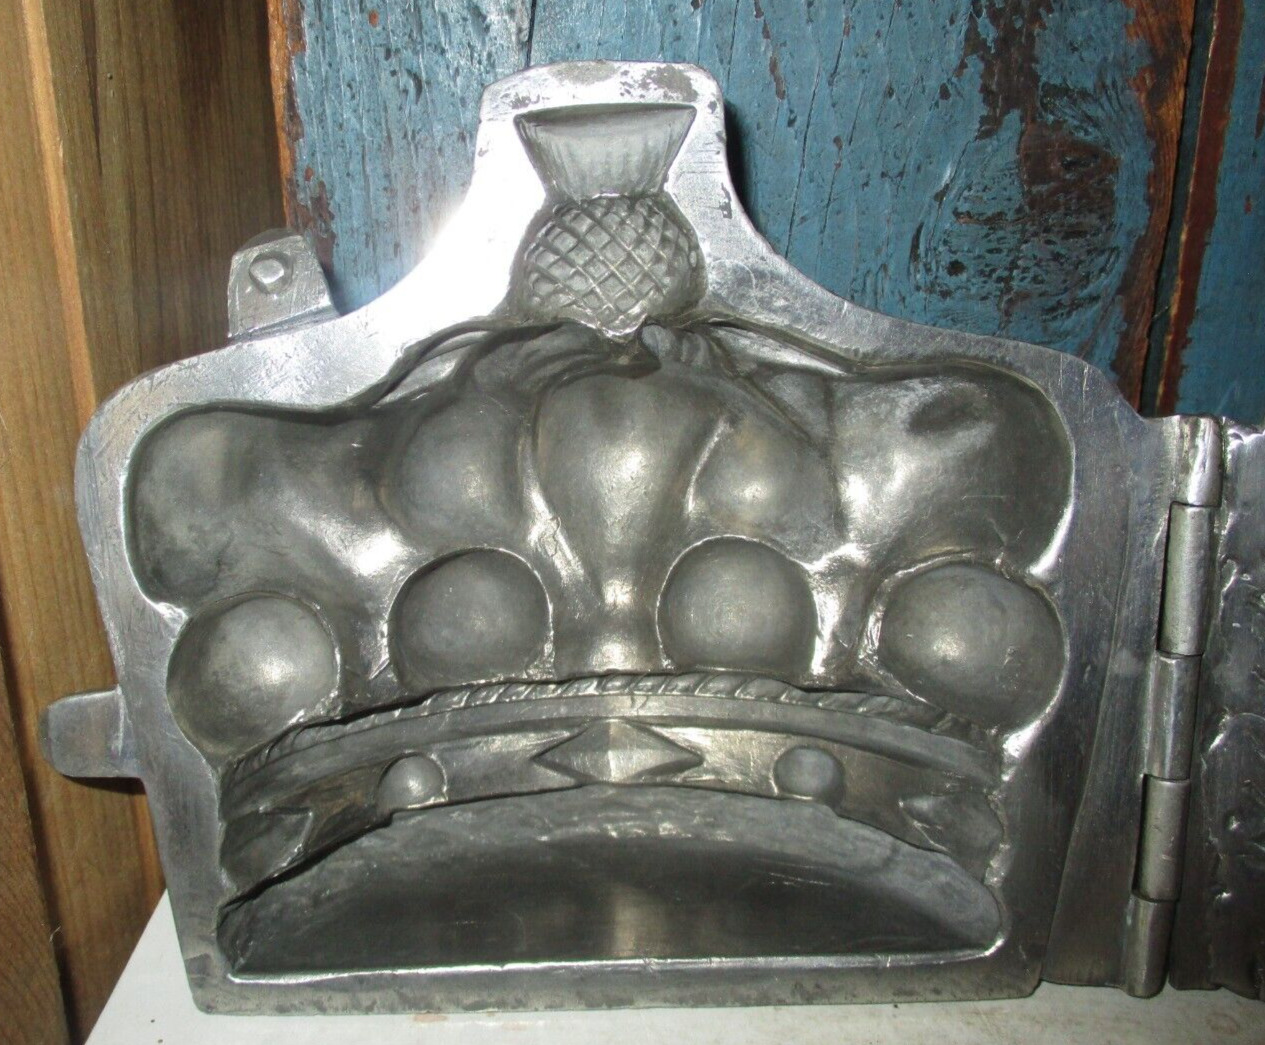 LARGE BANQUET SIZE ANTIQUE CROWN SHAPED PEWTER ICE CREAM MOLD